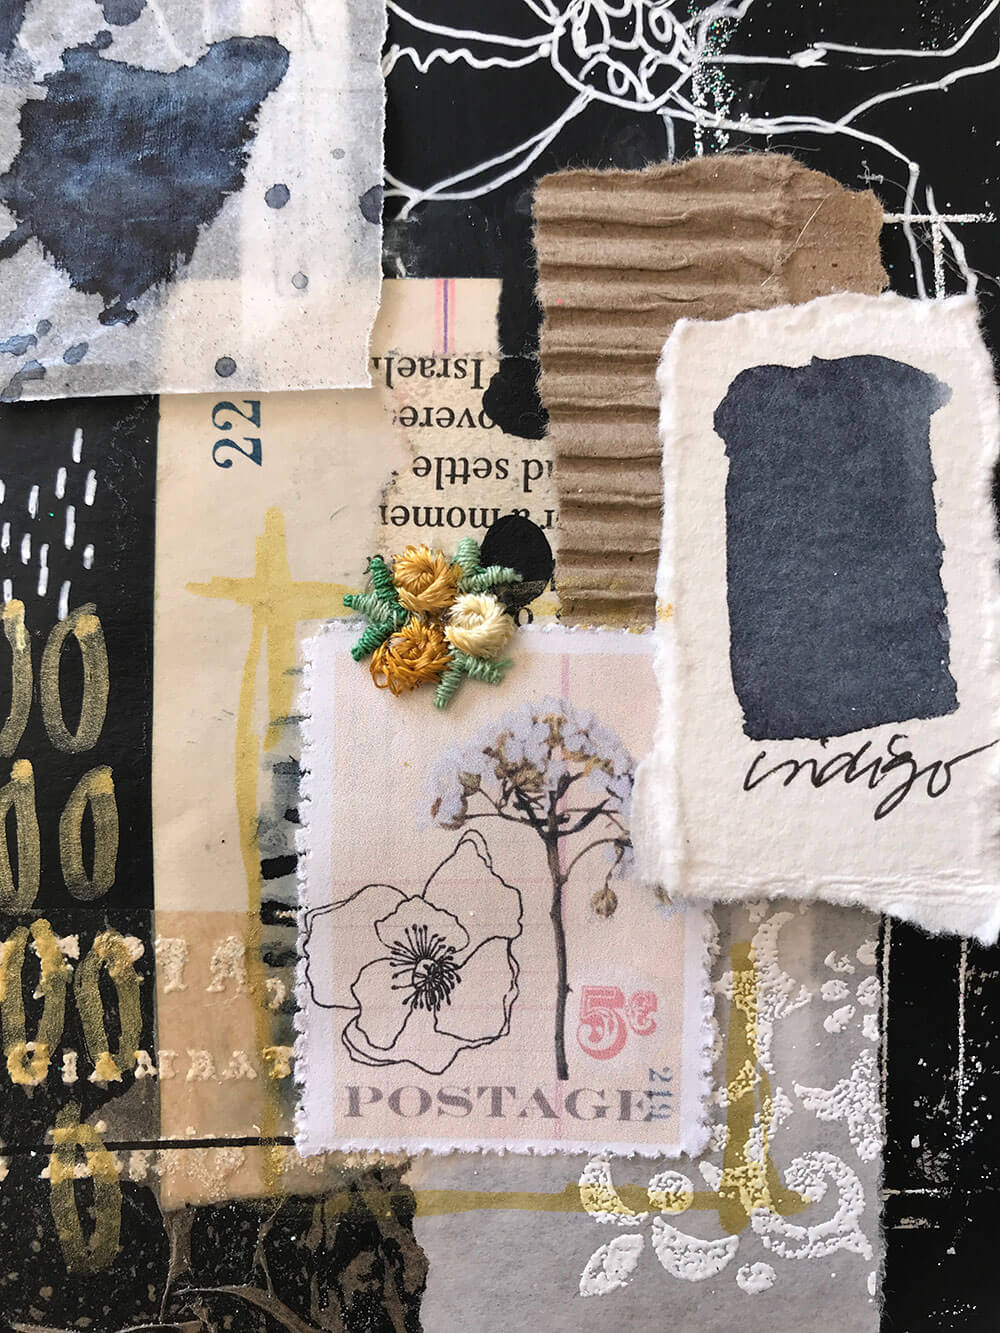 Close-up view of Marilou’s original designs on a faux stamp as part of a collage